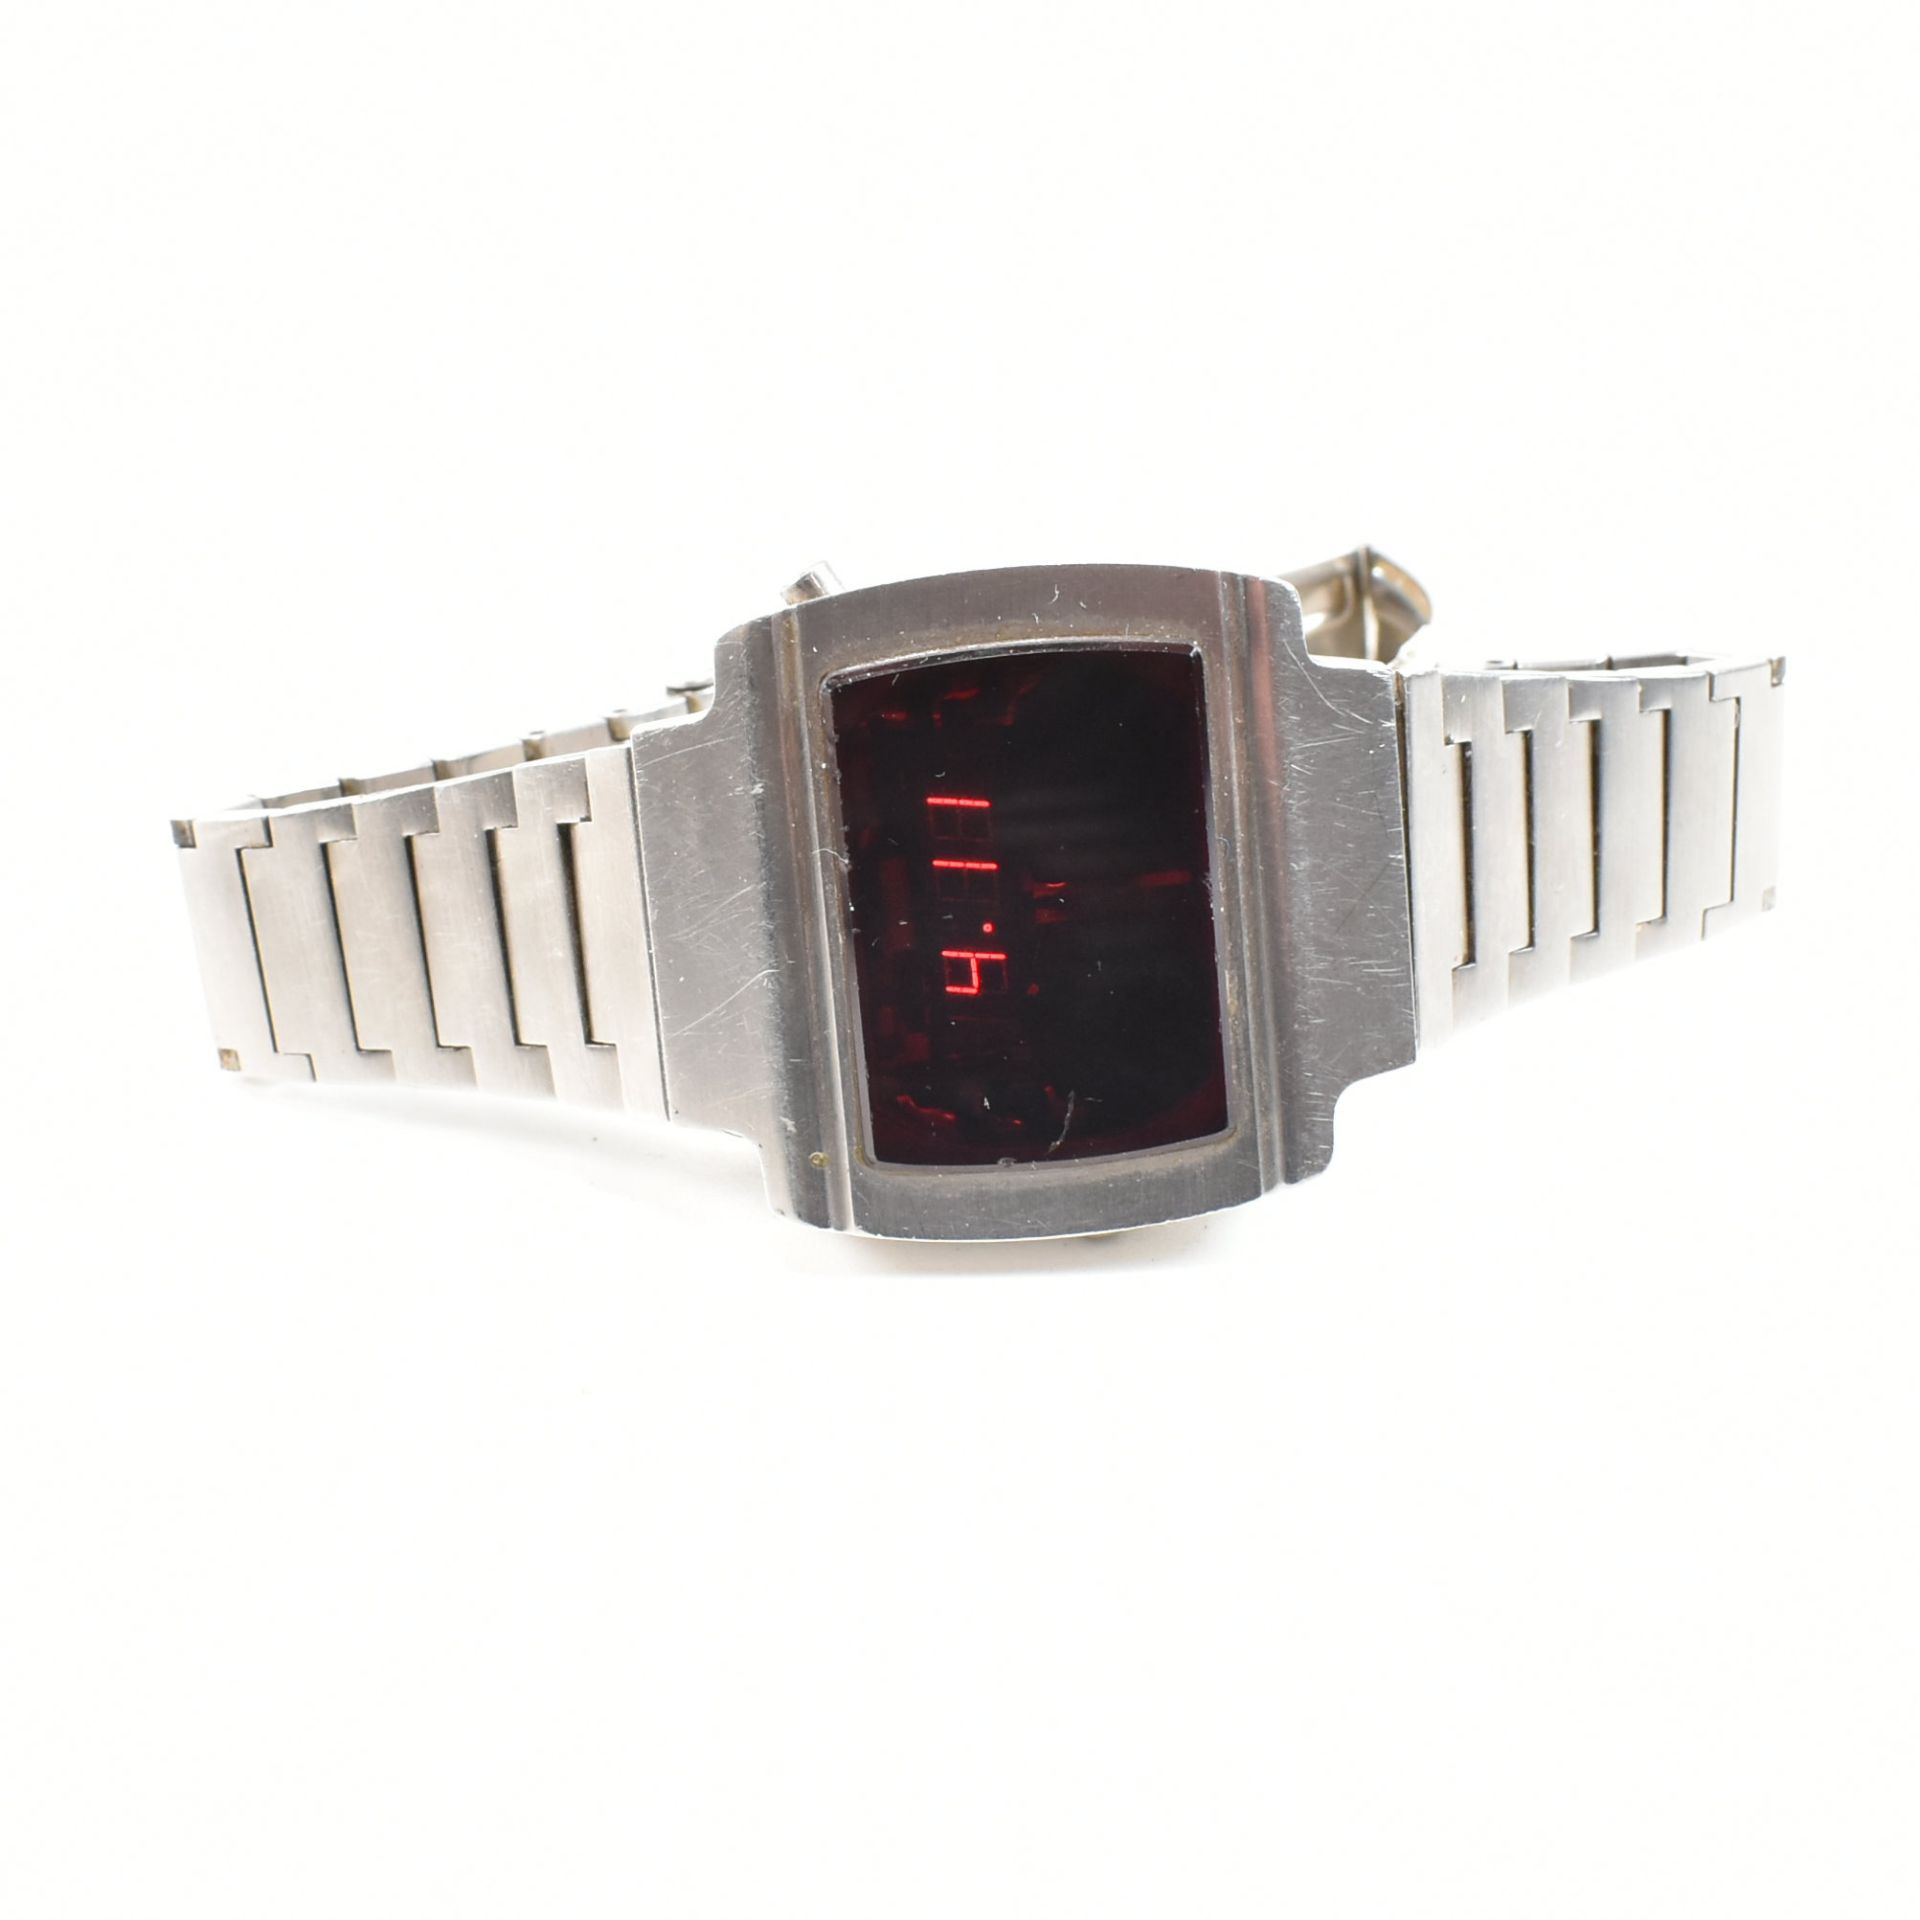 TWO 1970S SANYO LED DIGITAL STAINLESS STEEL WATCHES - Image 7 of 8